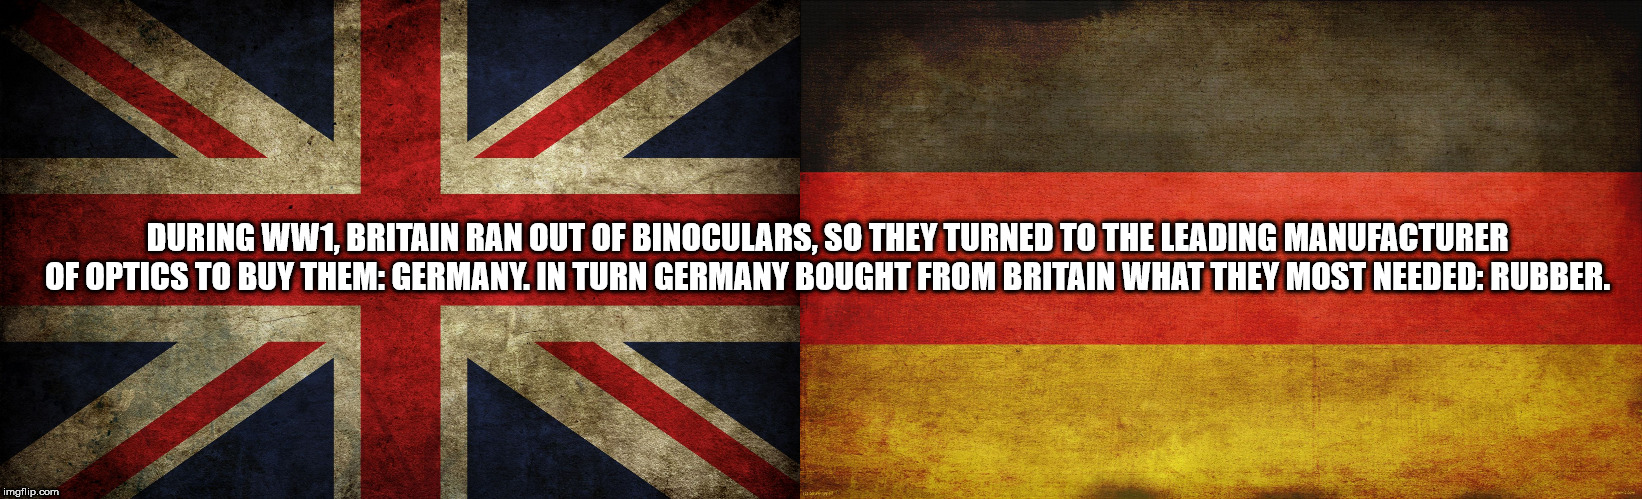 great britain flag - During WW1, Britain Ran Out Of Binoculars, So They Turned To The Leading Manufacturer Of Optics To Buy Them Germany. In Turn Germany Bought From Britain What They Most Needed Rubber. imgflip.com